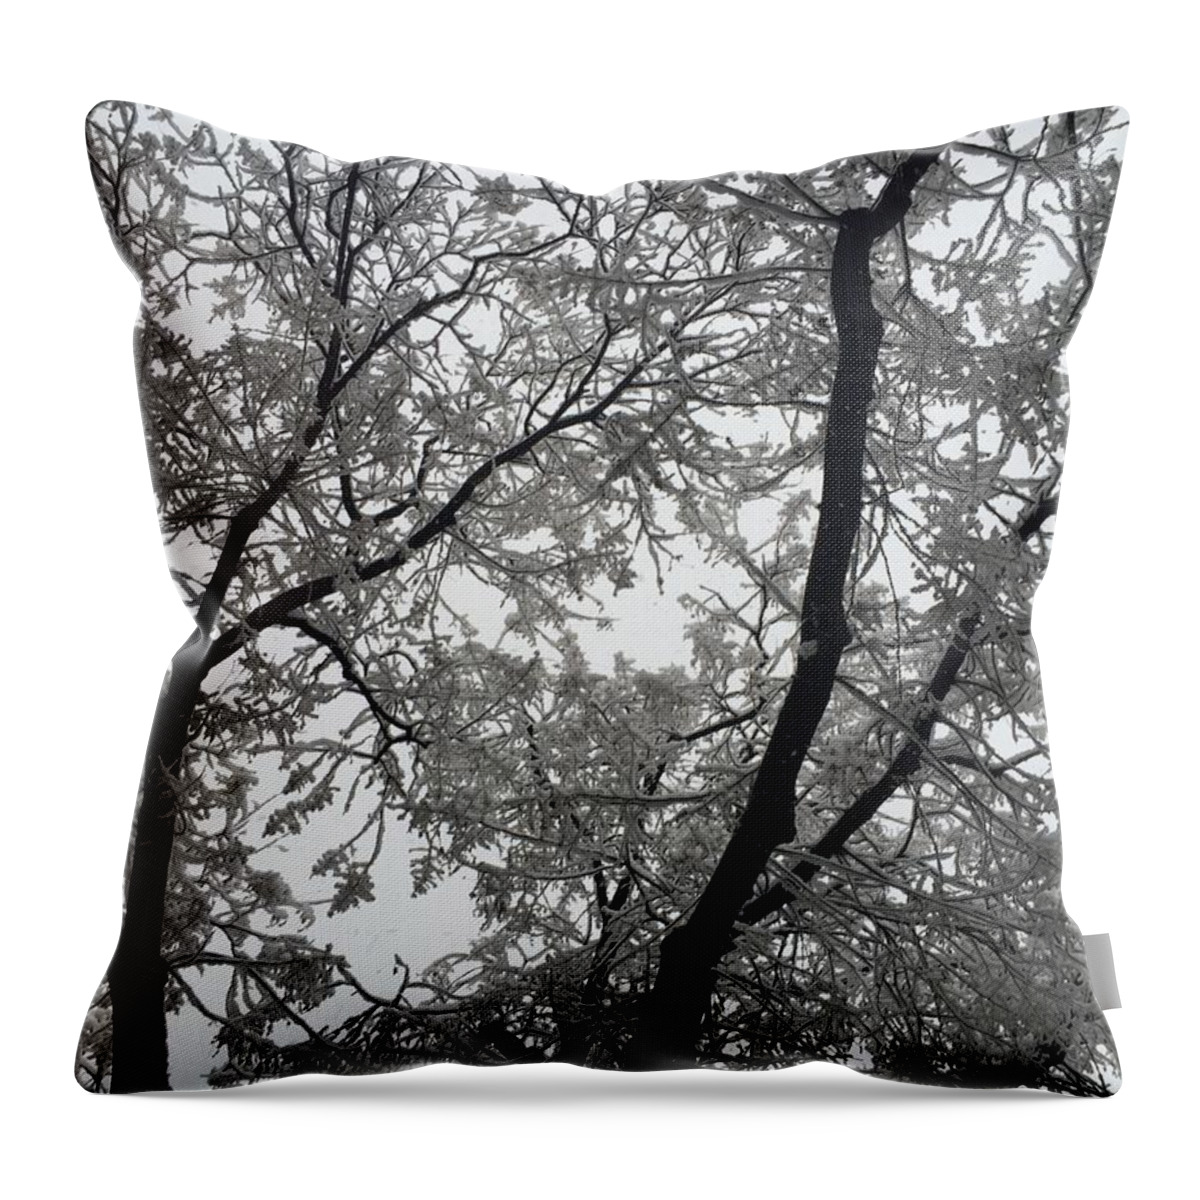 A Snowy Morning Tree Throw Pillow featuring the photograph A Snowy Morning Tree by Stephanie Ventura